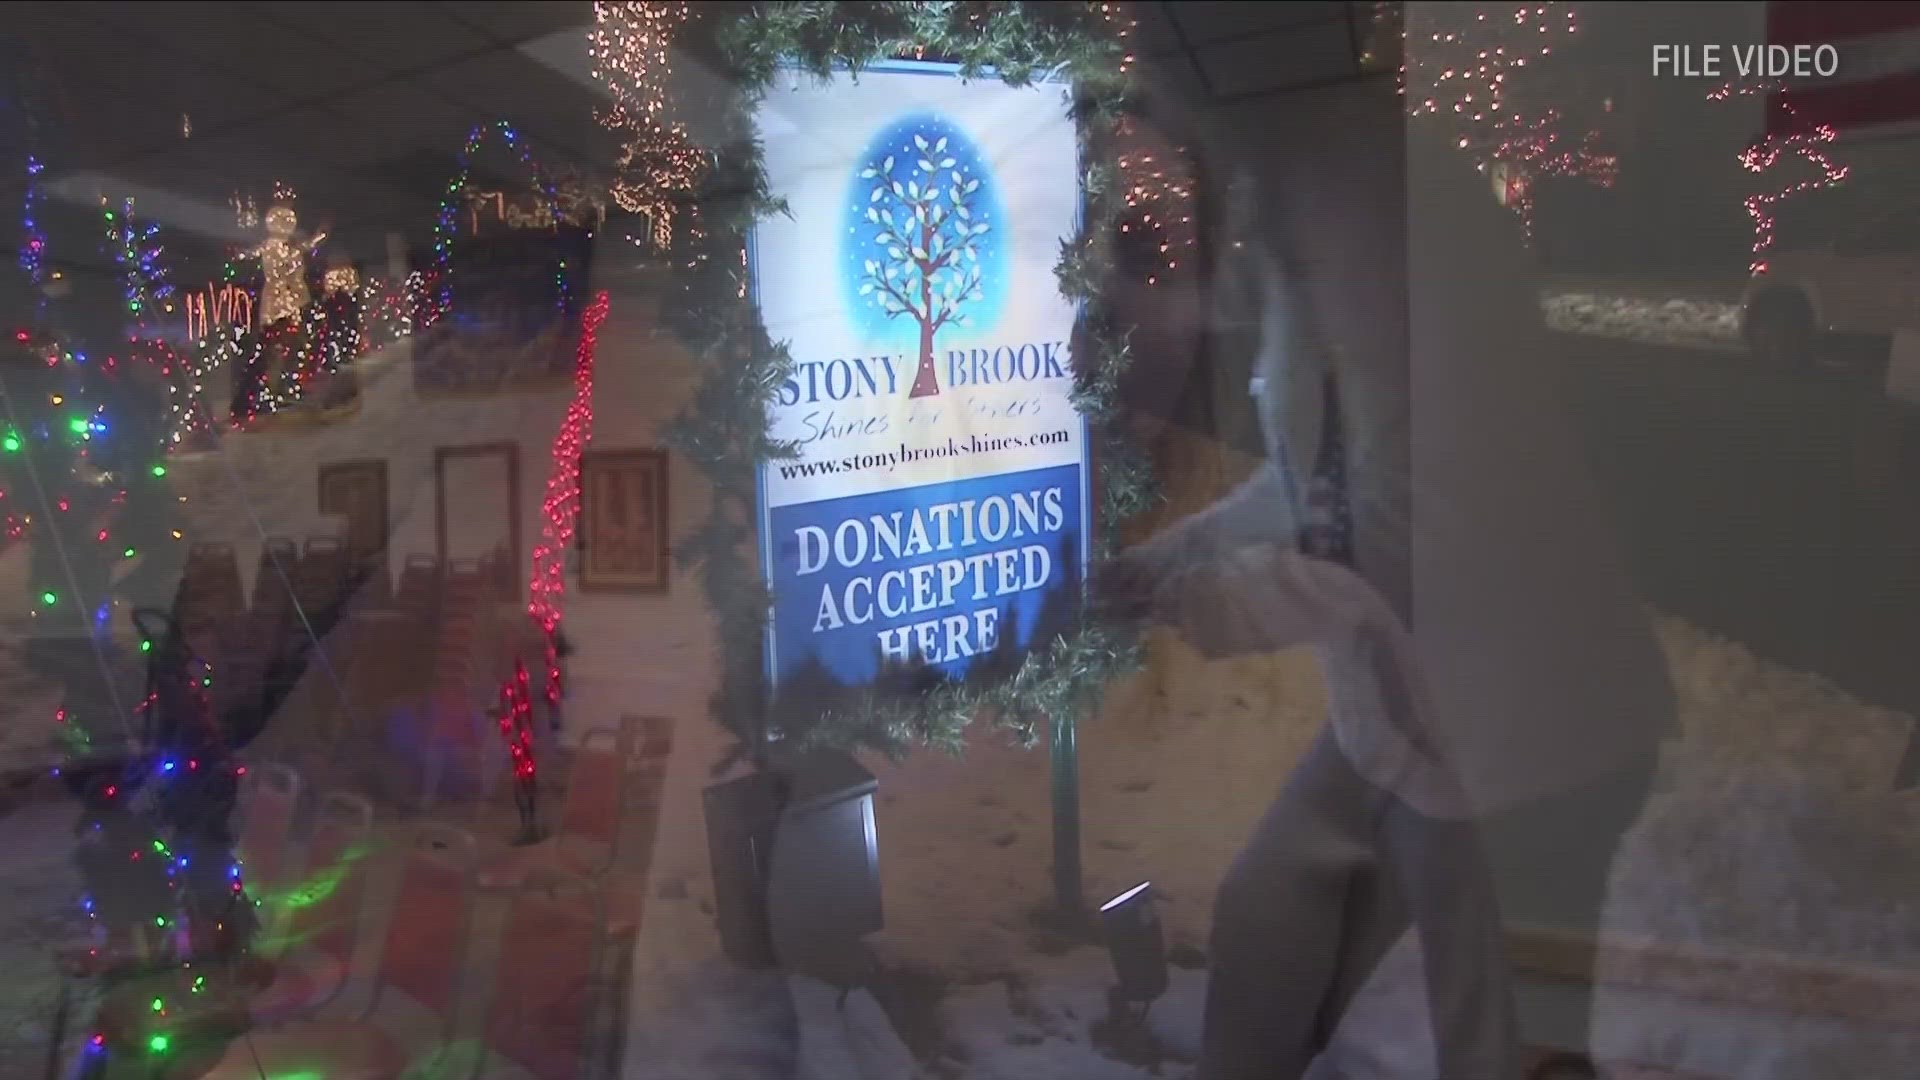 Each year the residents transform their entire neighborhood into a Christmas wonderland to raise money for the charity.